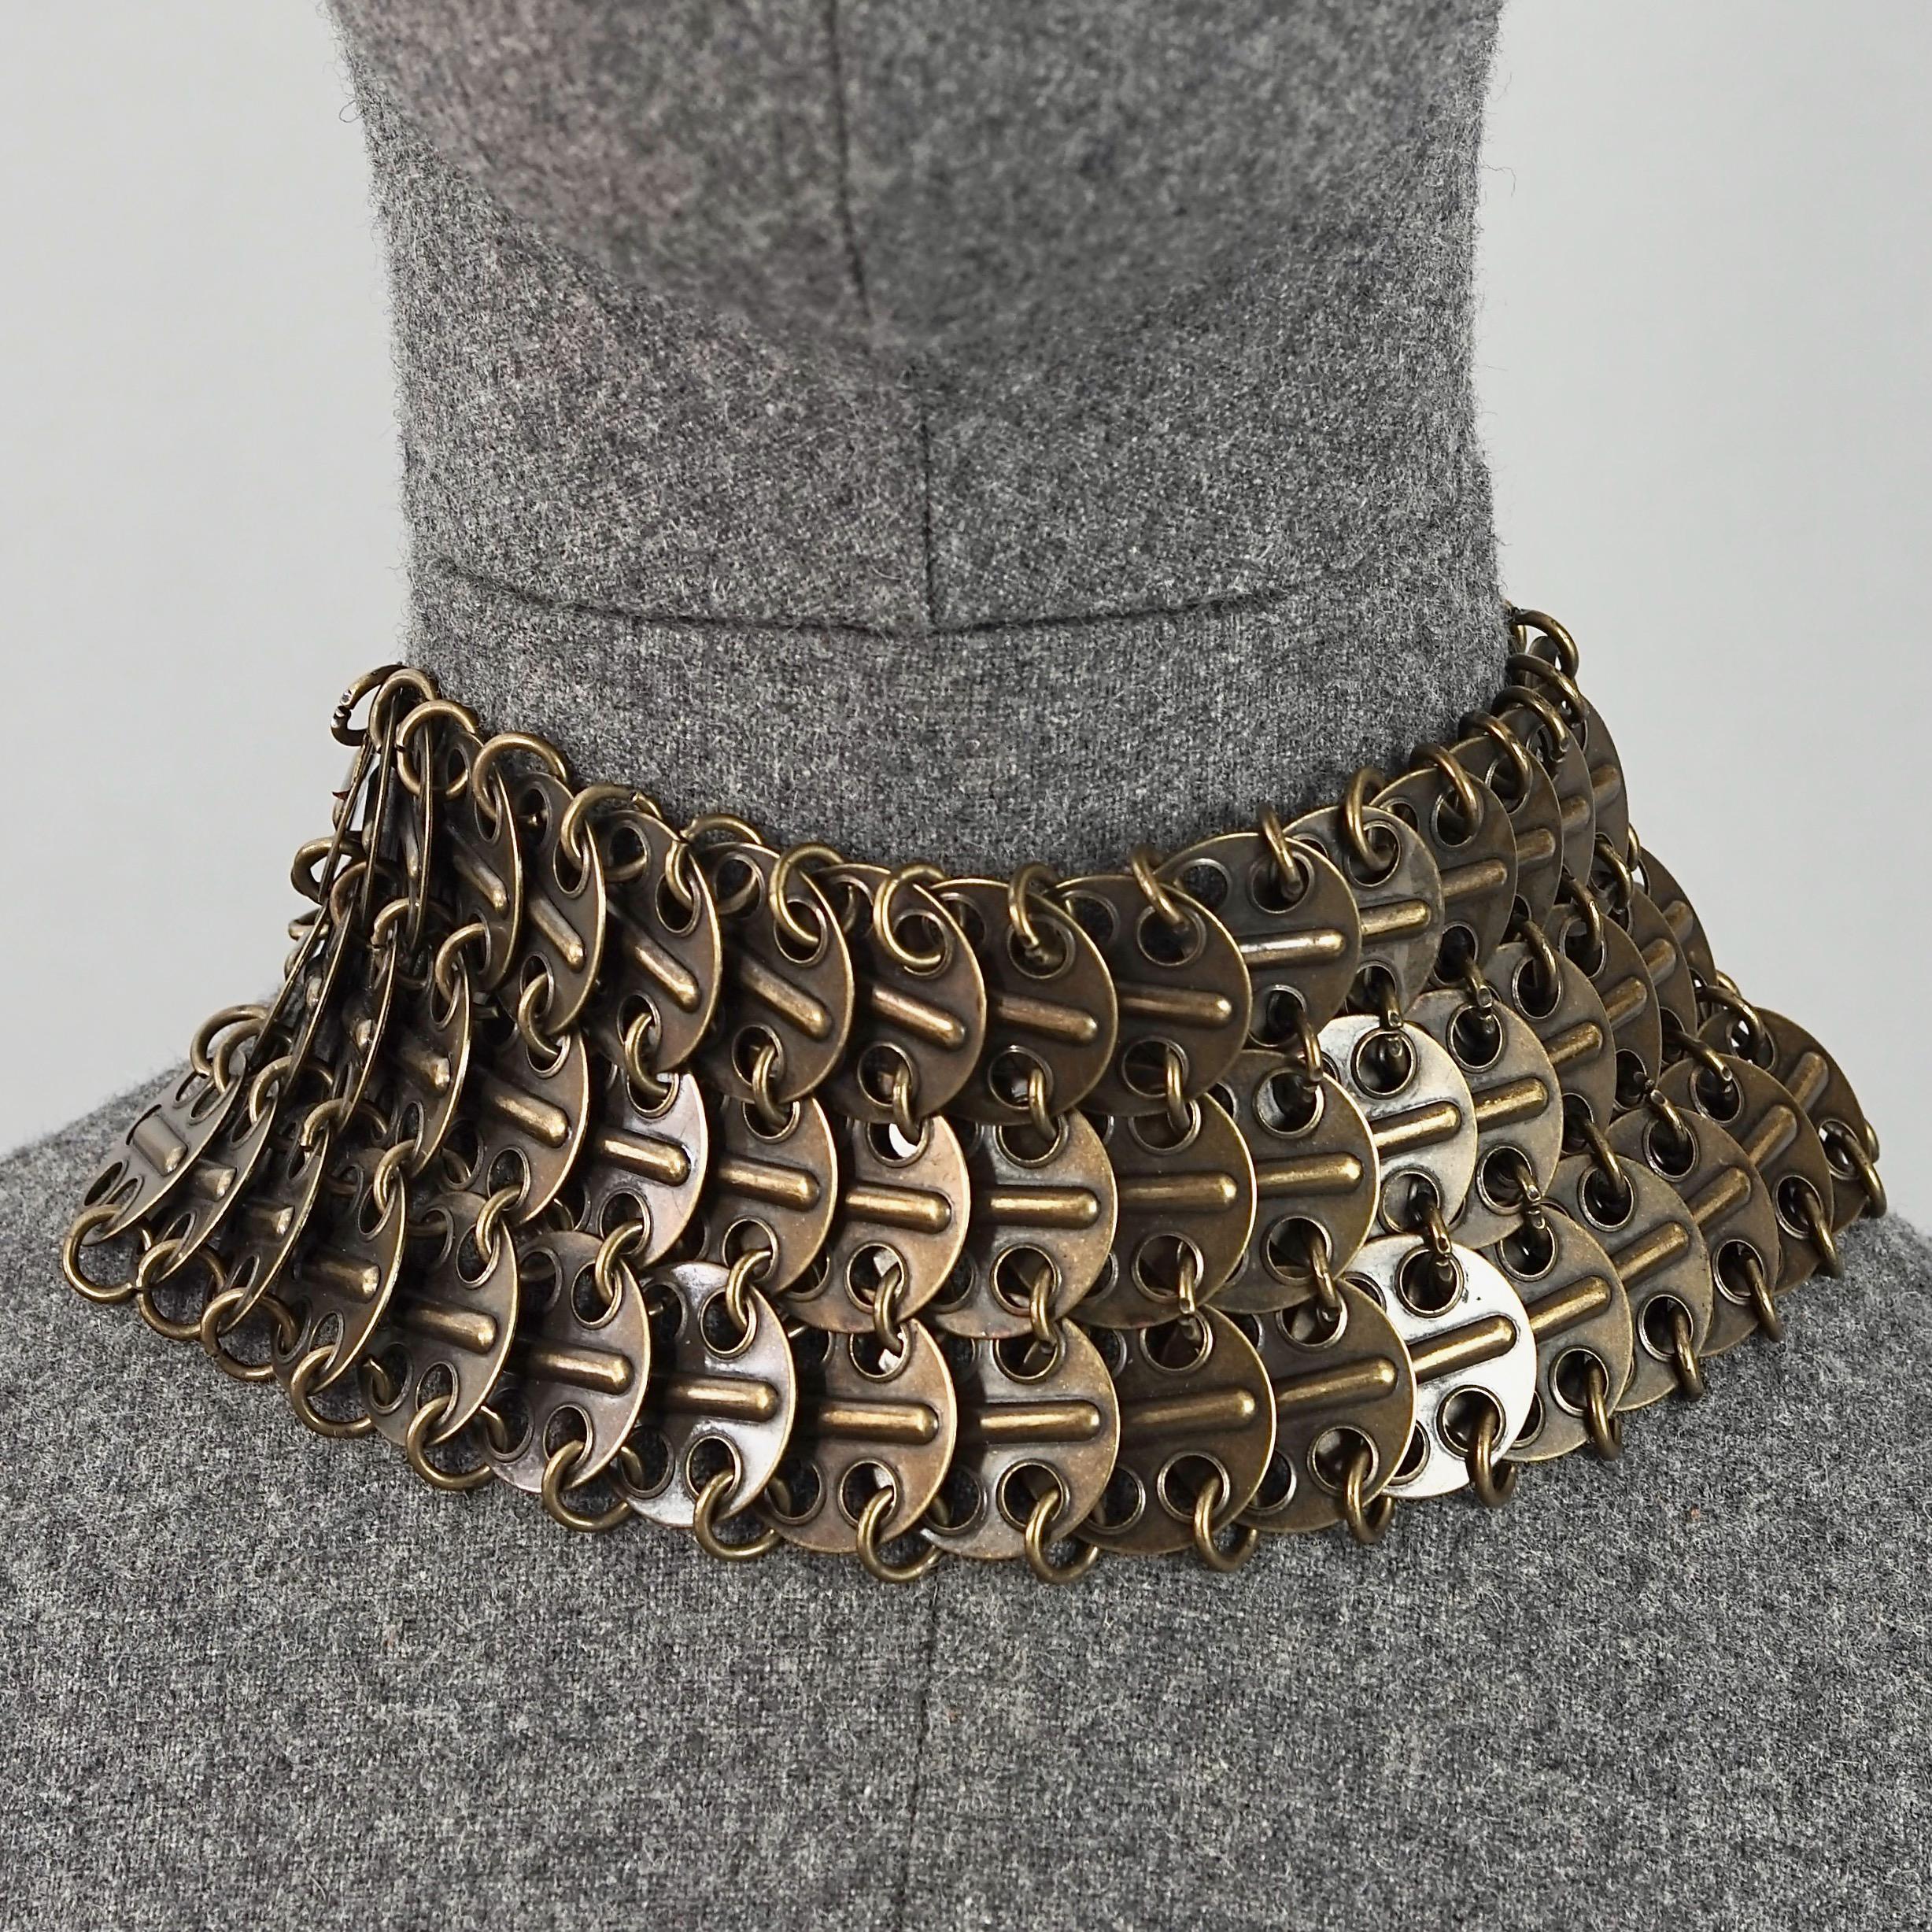 Vintage YVES SAINT LAURENT Ysl Chainmail Disc Bronze Choker Necklace

Measurements:
Height: 2.75 inches (7 cm)
Wearable Length: 12.99 inches (33 cm) until 15.75 inches (40 cm)

Features:
- 100% Authentic YVES SAINT LAURENT.
- Metal chainmail choker